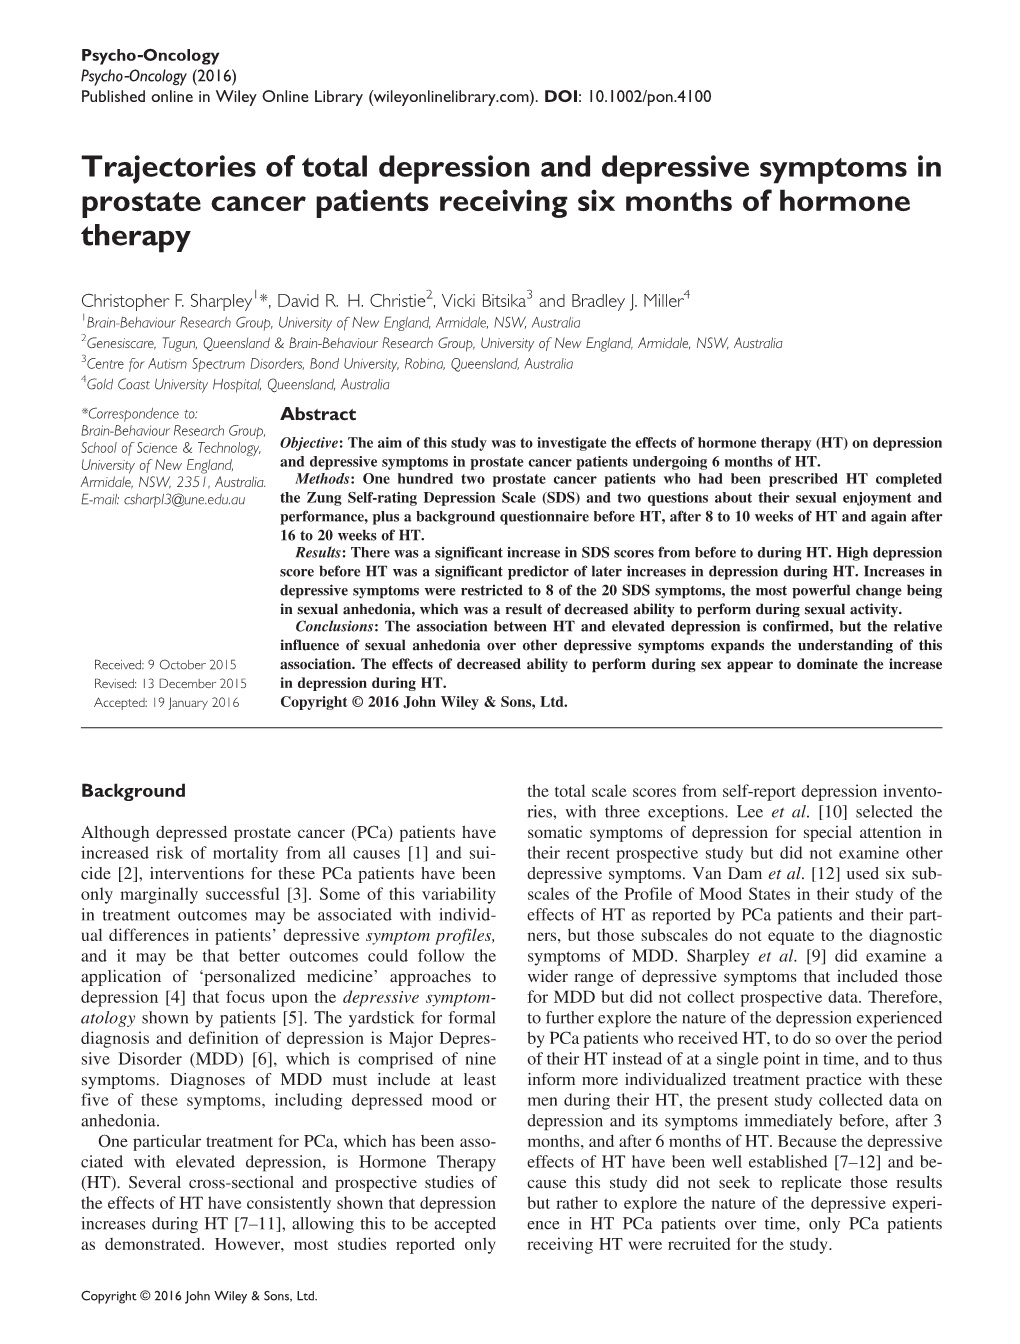 Trajectories of Total Depression and Depressive Symptoms in Prostate Cancer Patients Receiving Six Months of Hormone Therapy